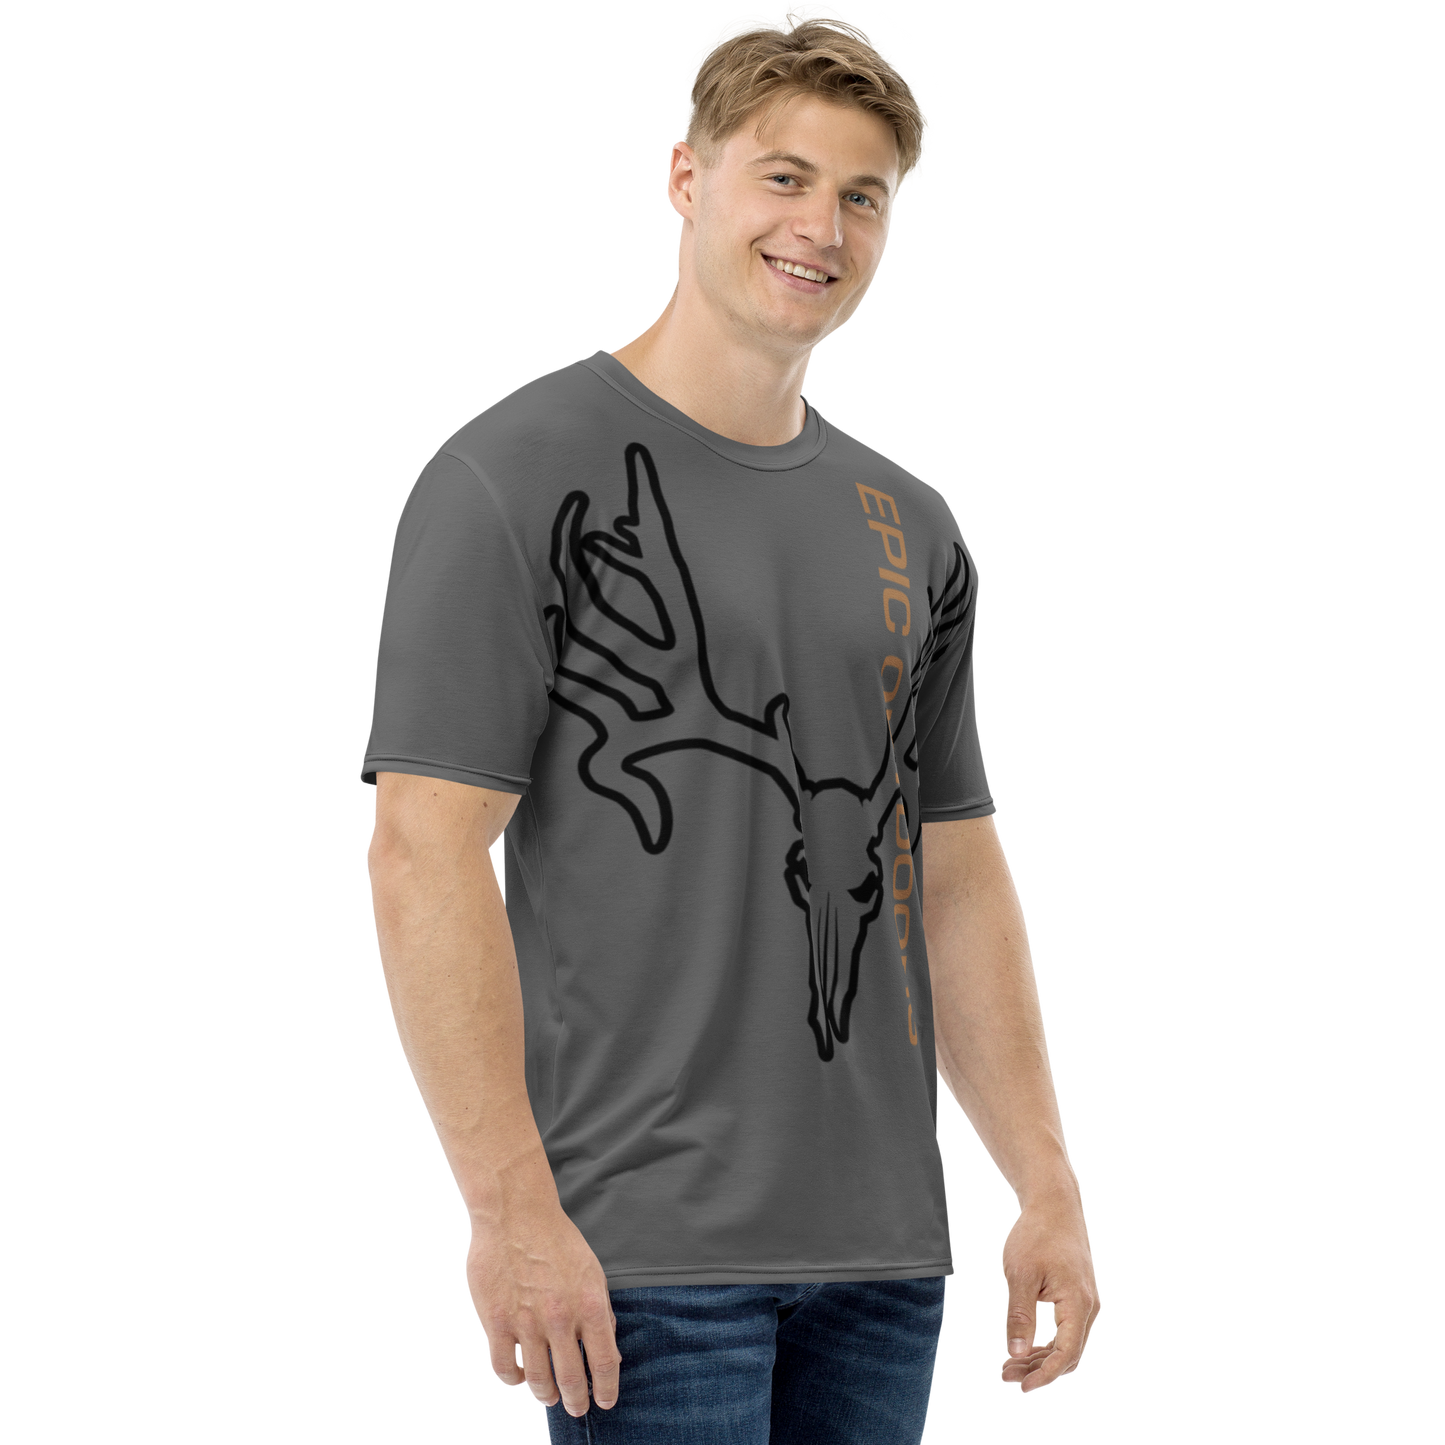 Extra Large Epic Logo Heavy Weight T-Shirt - 100% Polyester